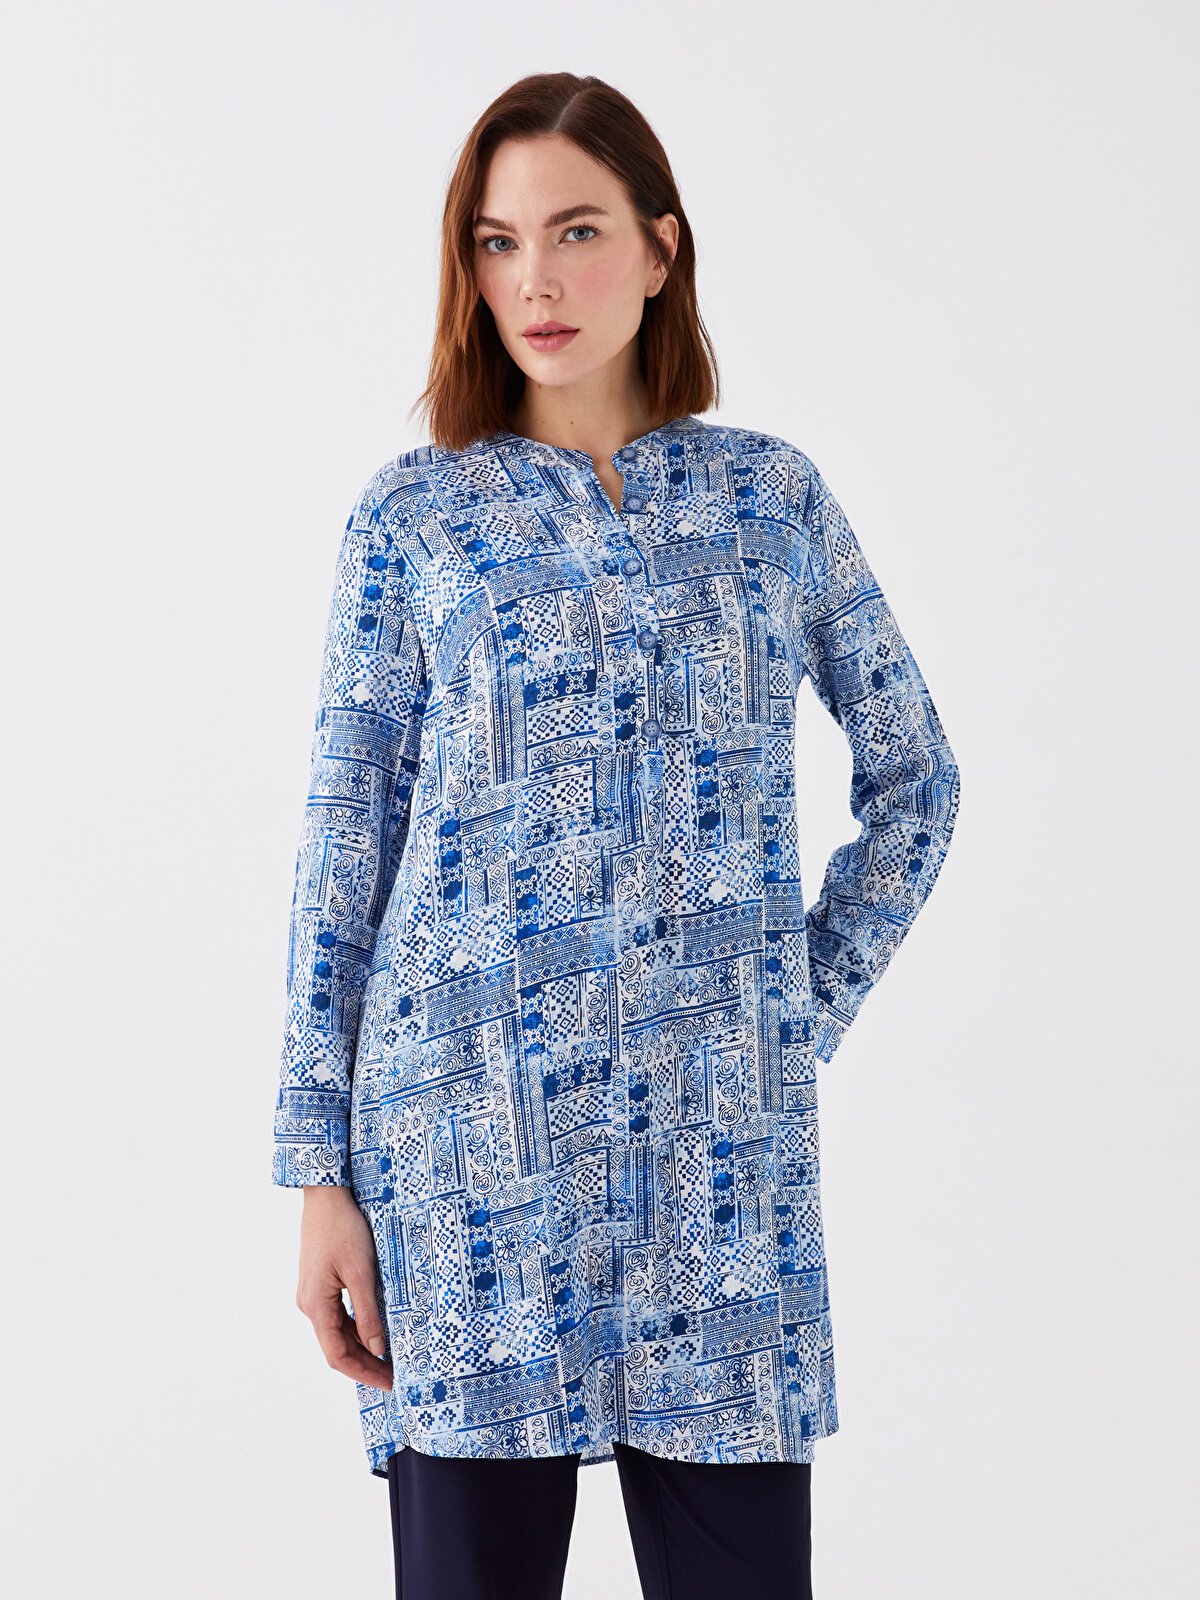 Women's Tunic With Print Collar Patterned Long Sleeve -S3AL82Z8 